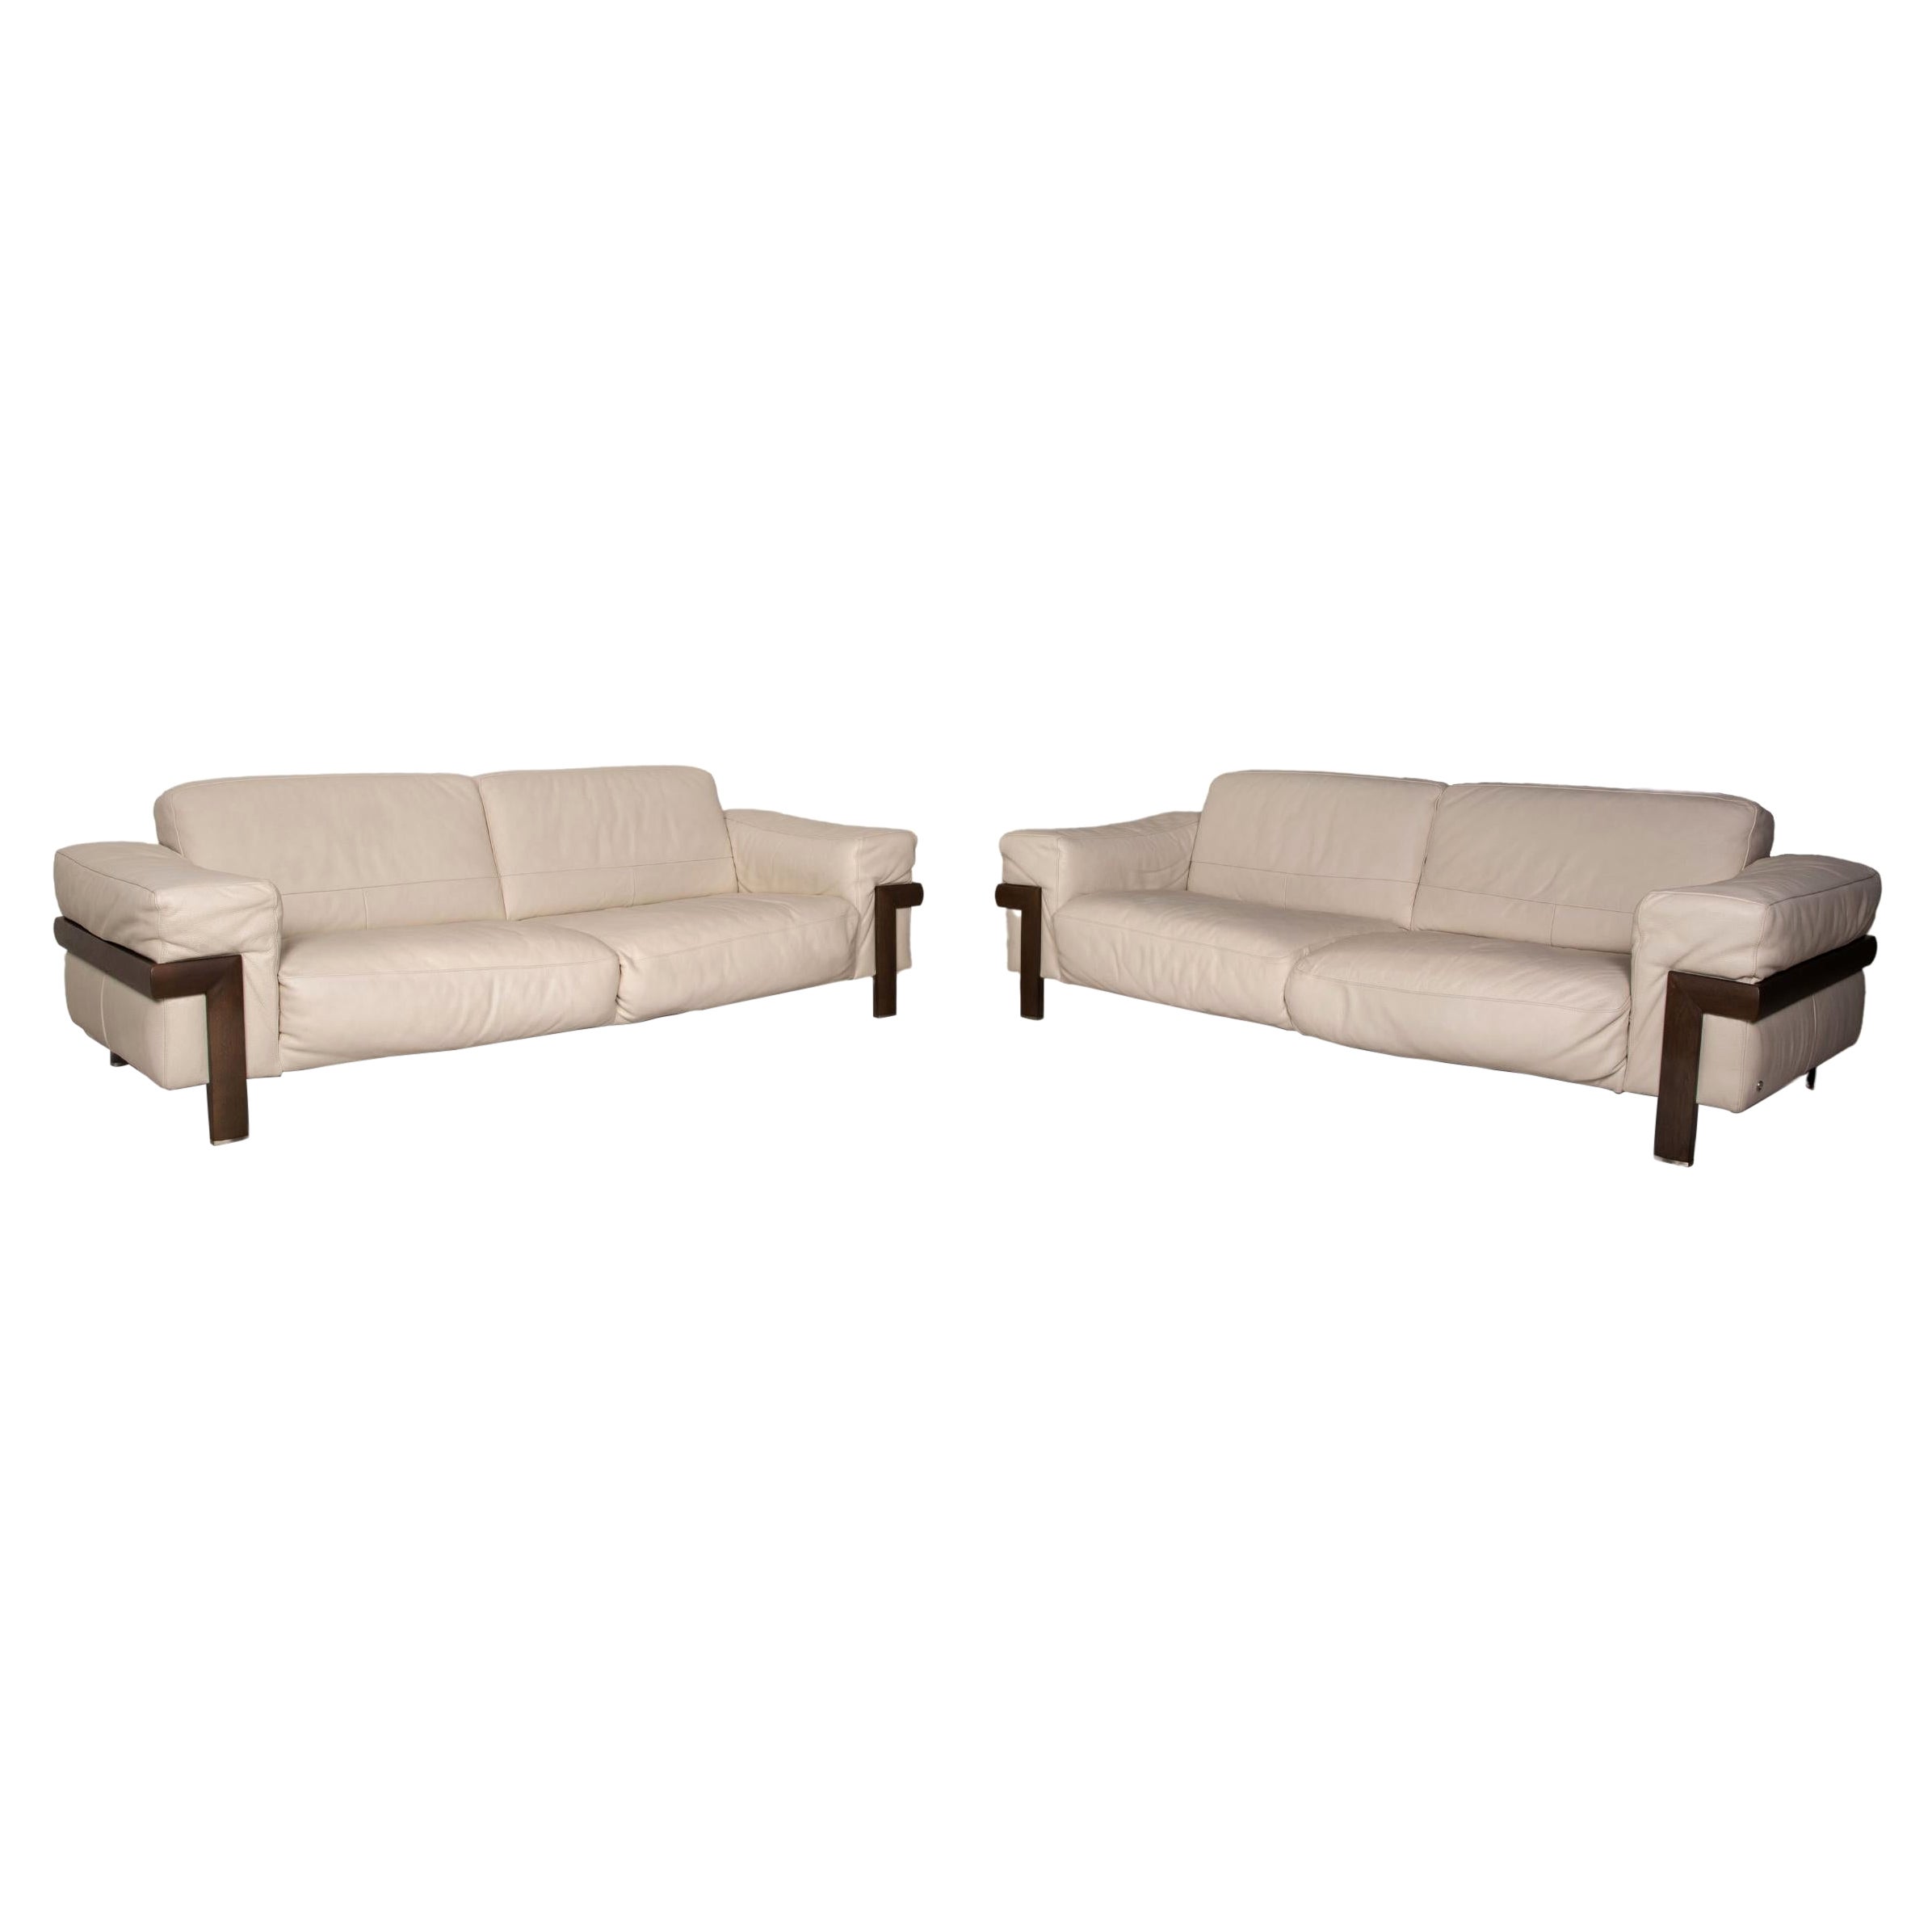 Natuzzi Leather Sofa Set Cream 2x Two-Seater Couch For Sale